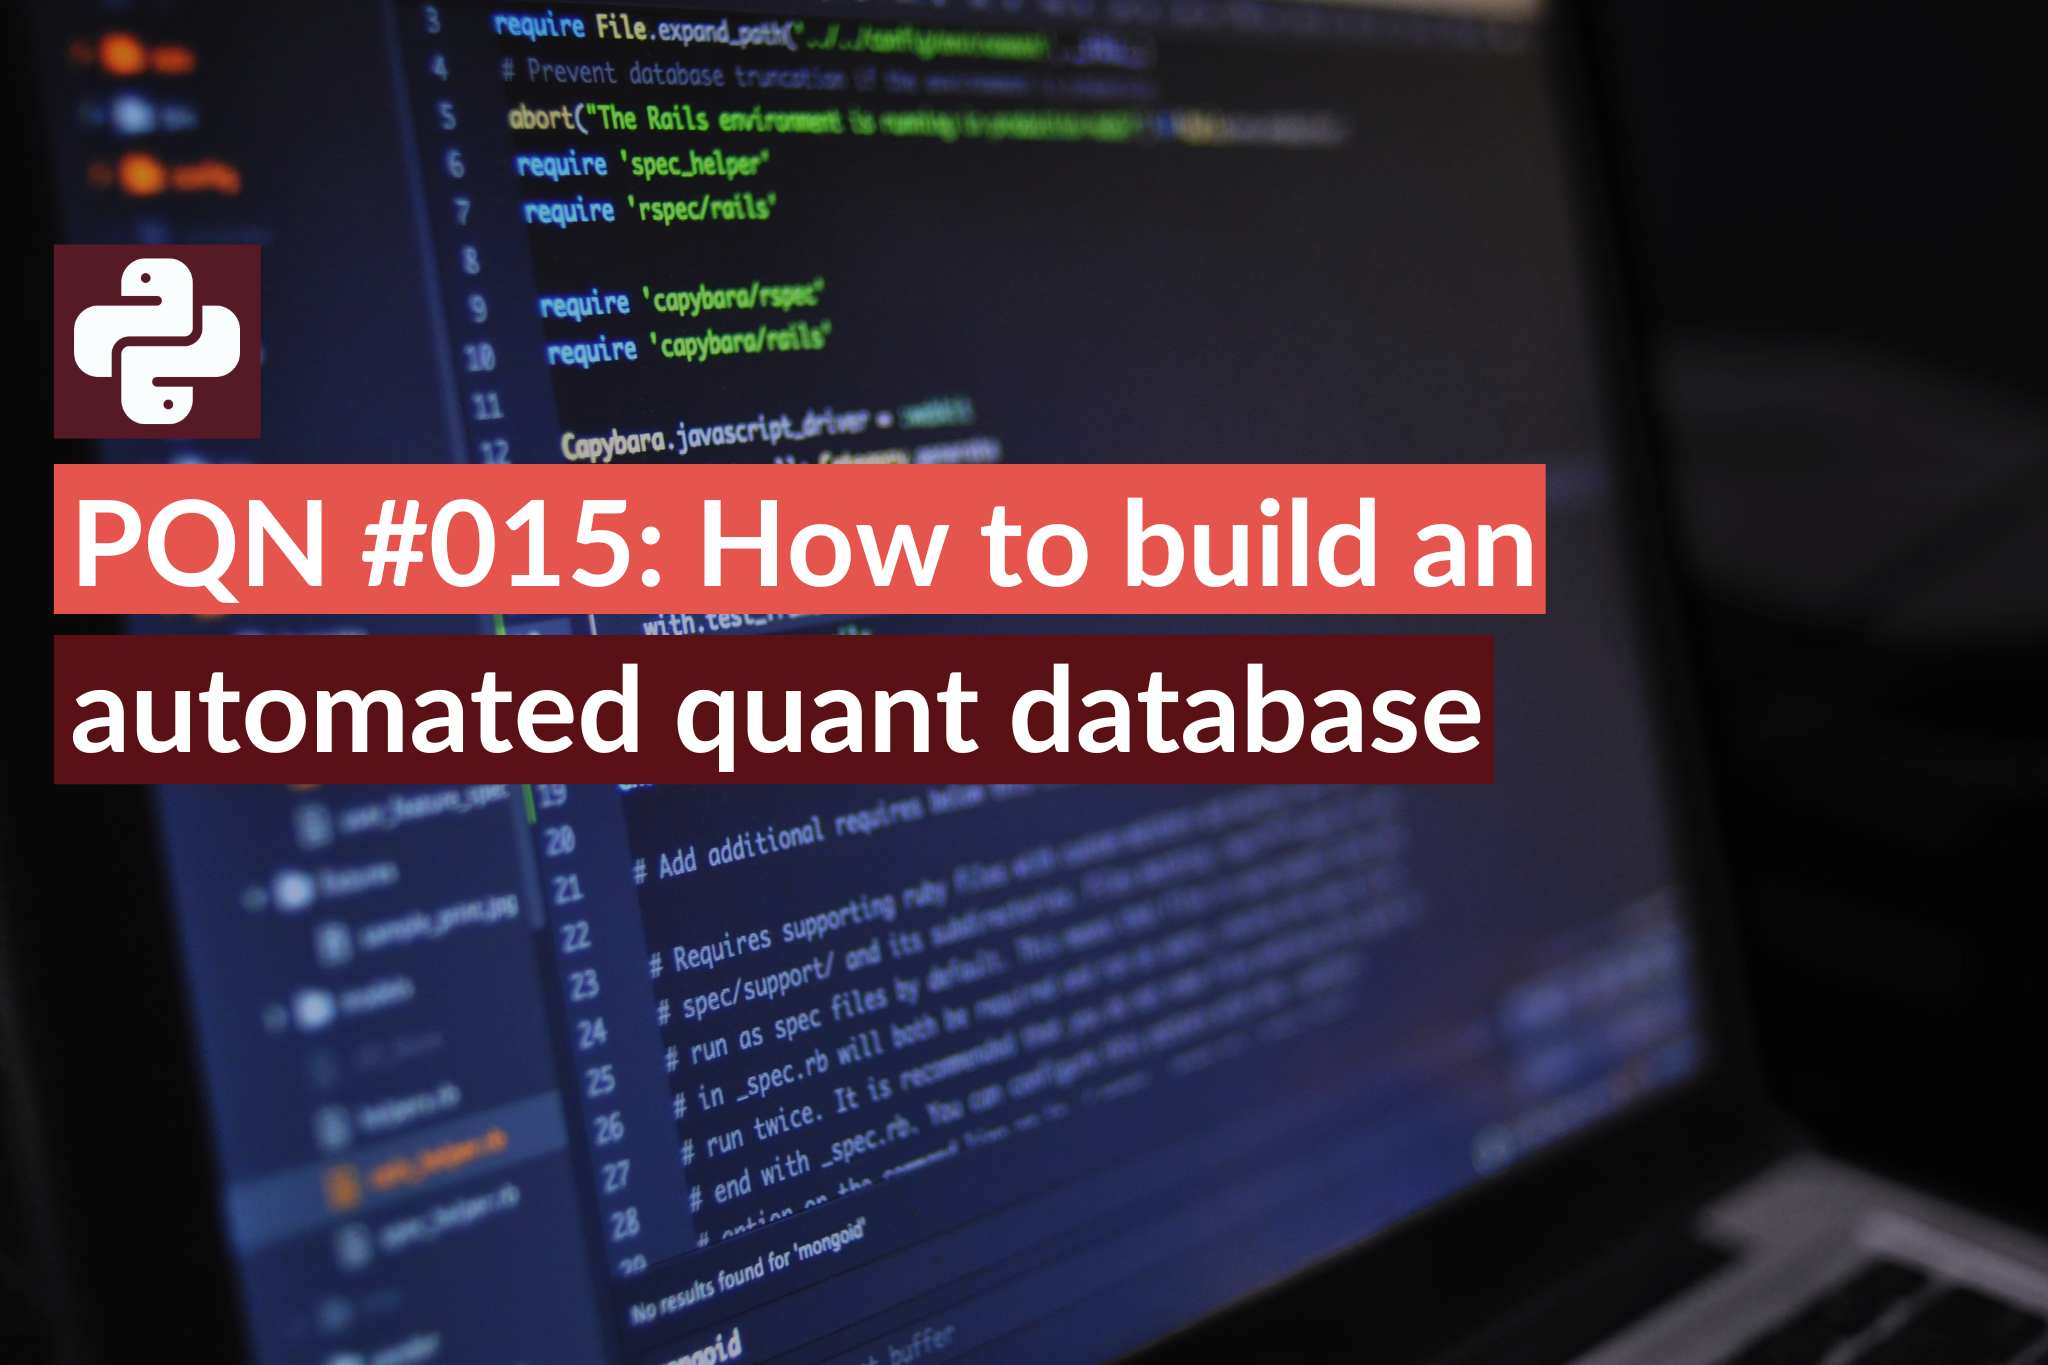 PQN #015 How to build an automated quant database